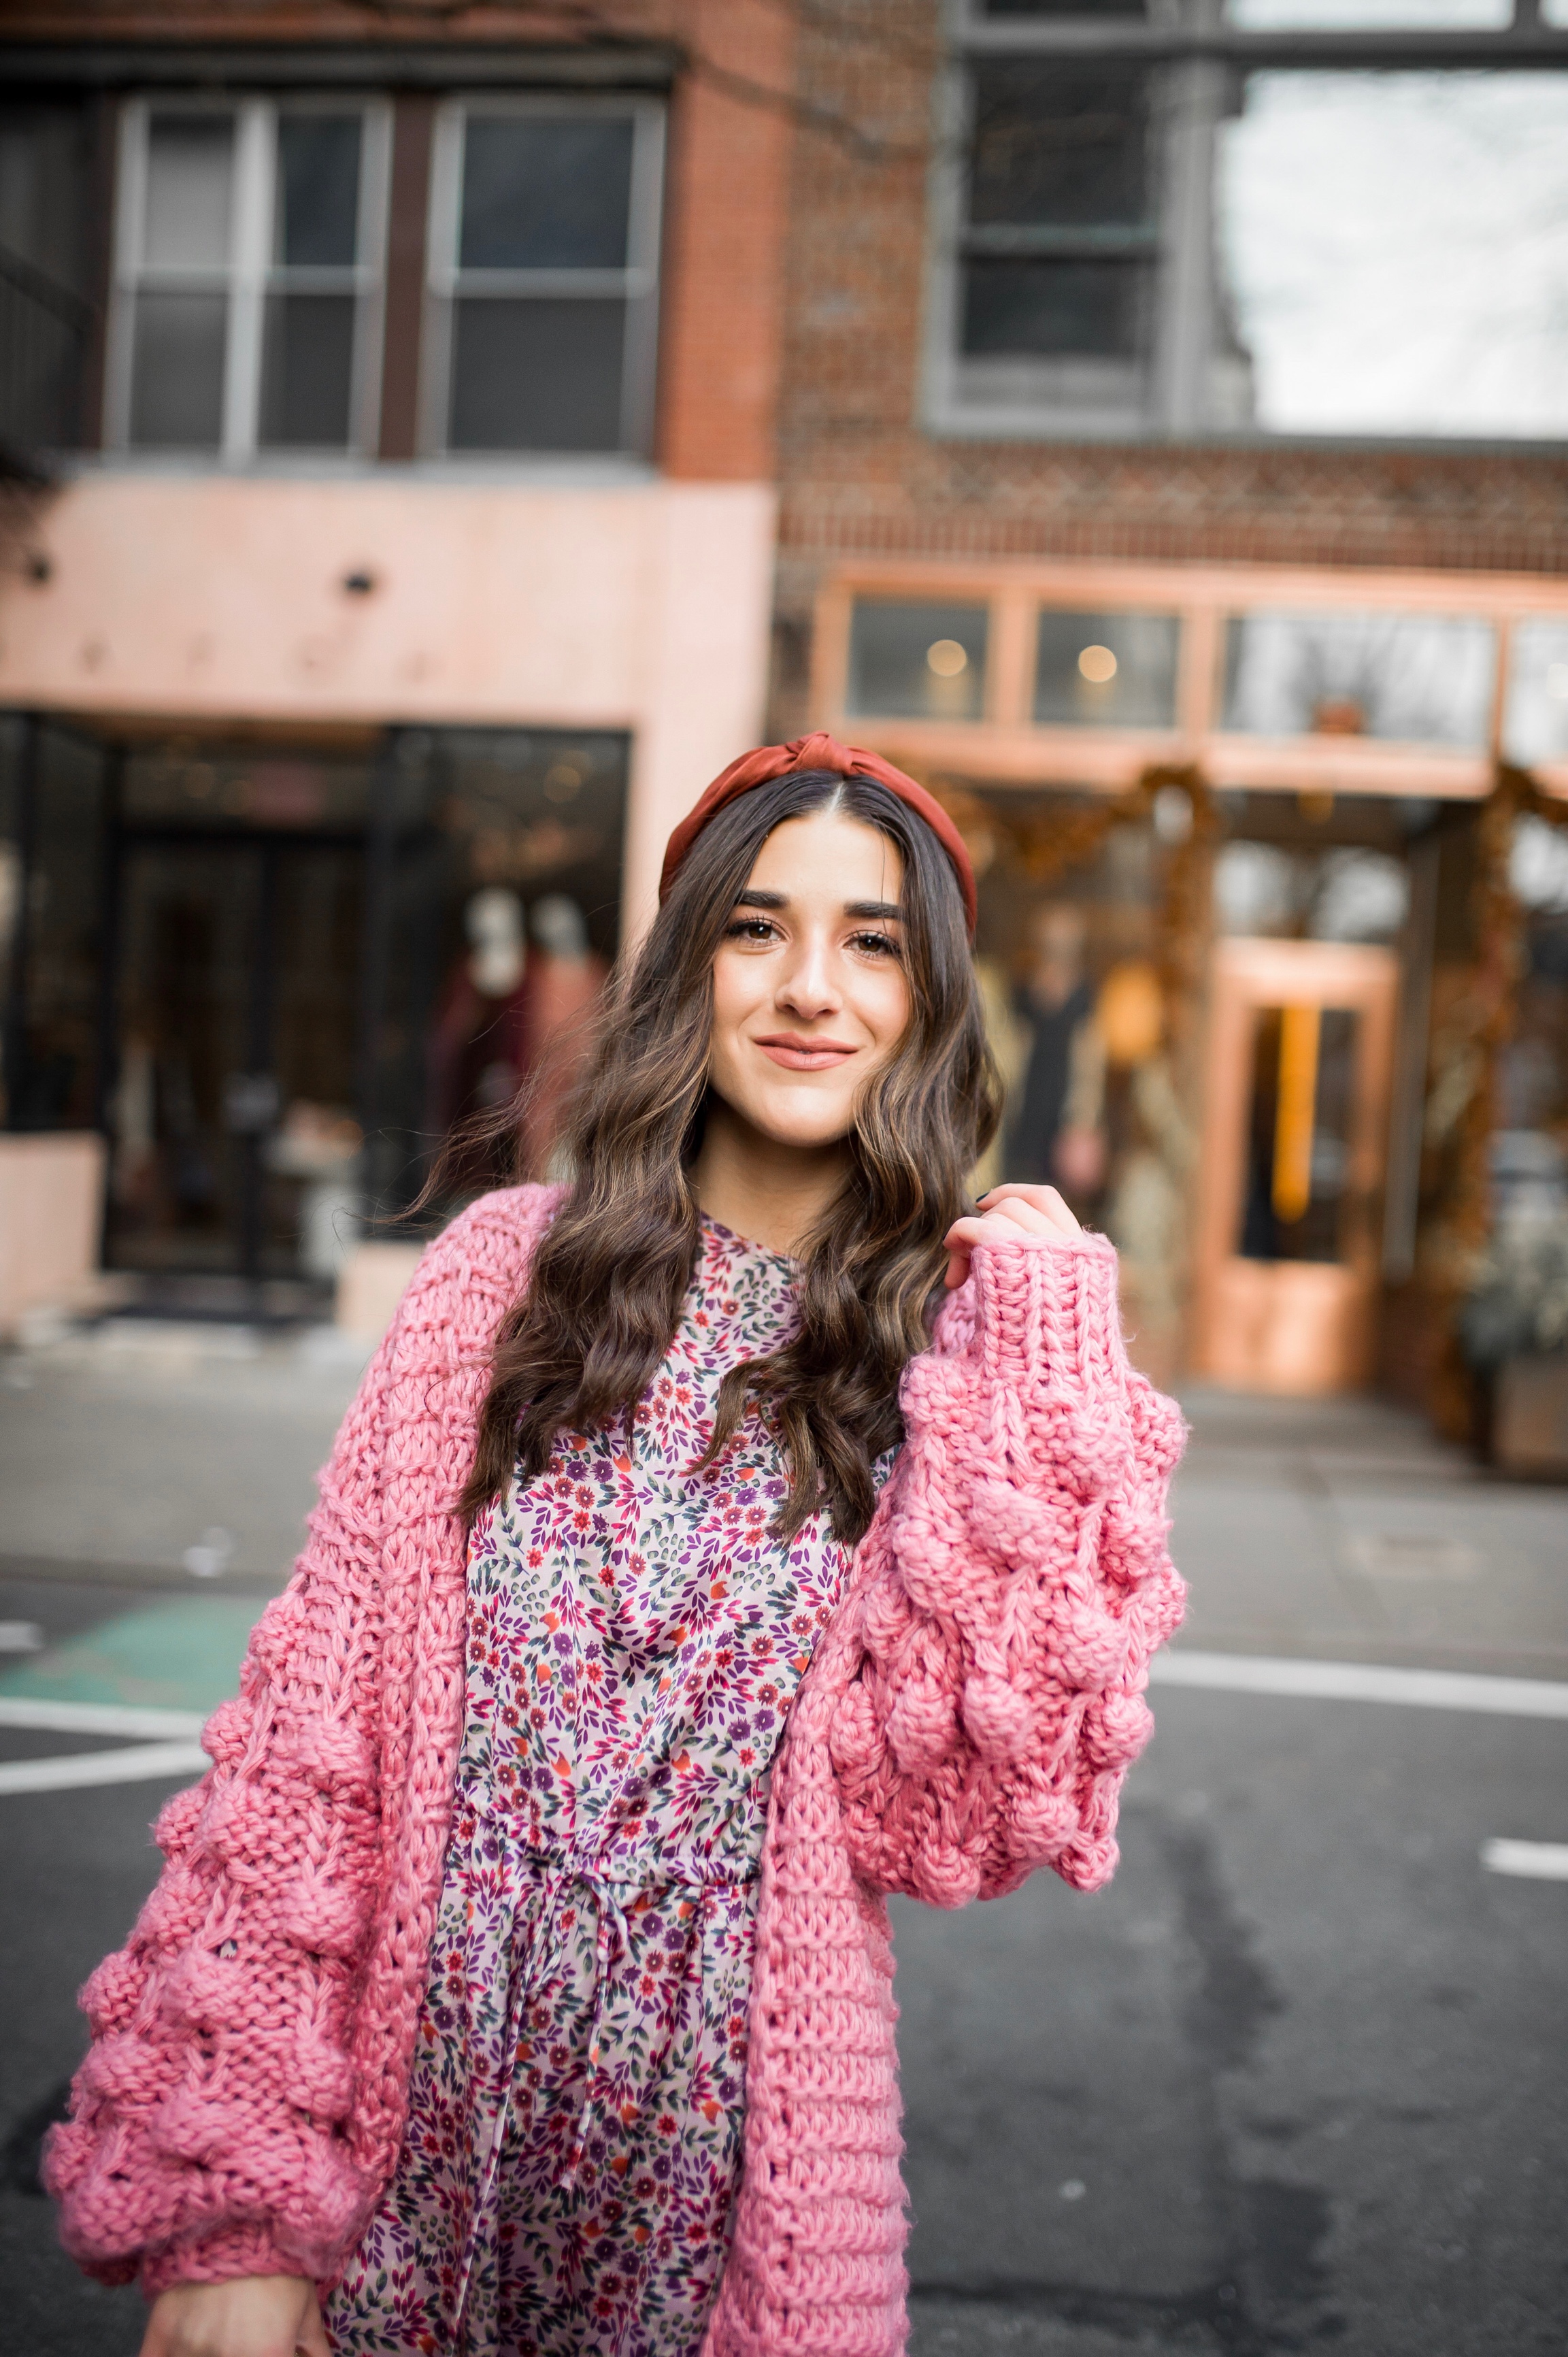 How Being In A Miserable Job Shaped My Entire Career Silk Floral Dress + Pink Pom Pom Sweater Esther Santer Fashion Blog NYC Street Style Blogger Outfit OOTD Trendy Shopping Mango Sale Winter How To Wear Maroon Velvet Booties  Zac Posen Swarovski Bag.jpg